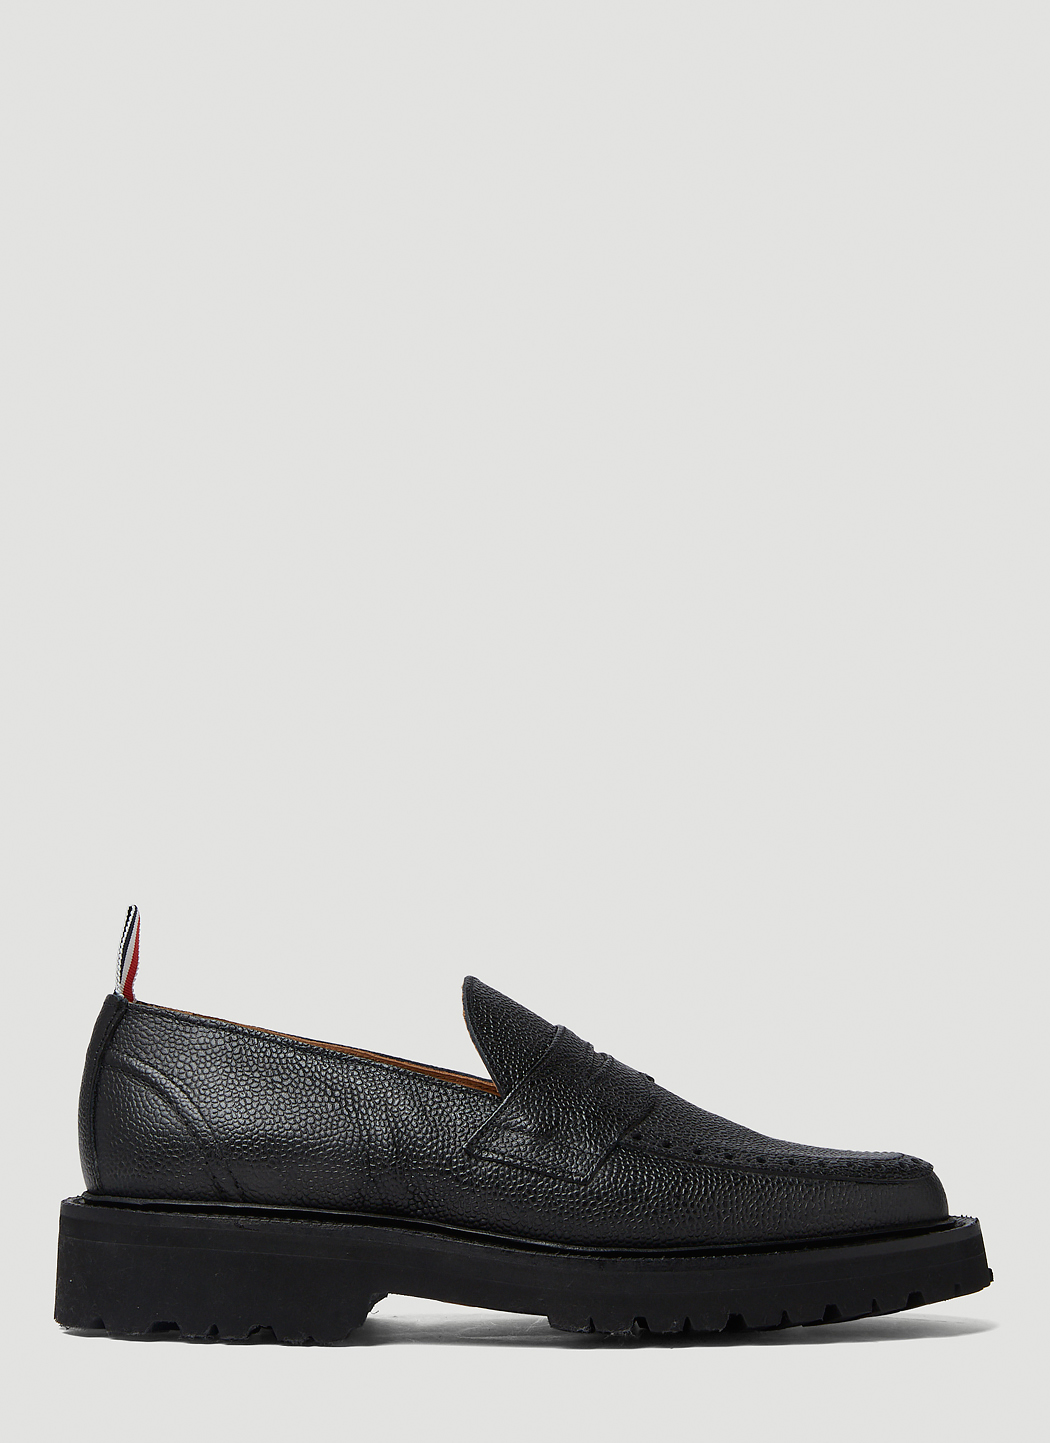 Commando Sole Penny Loafers